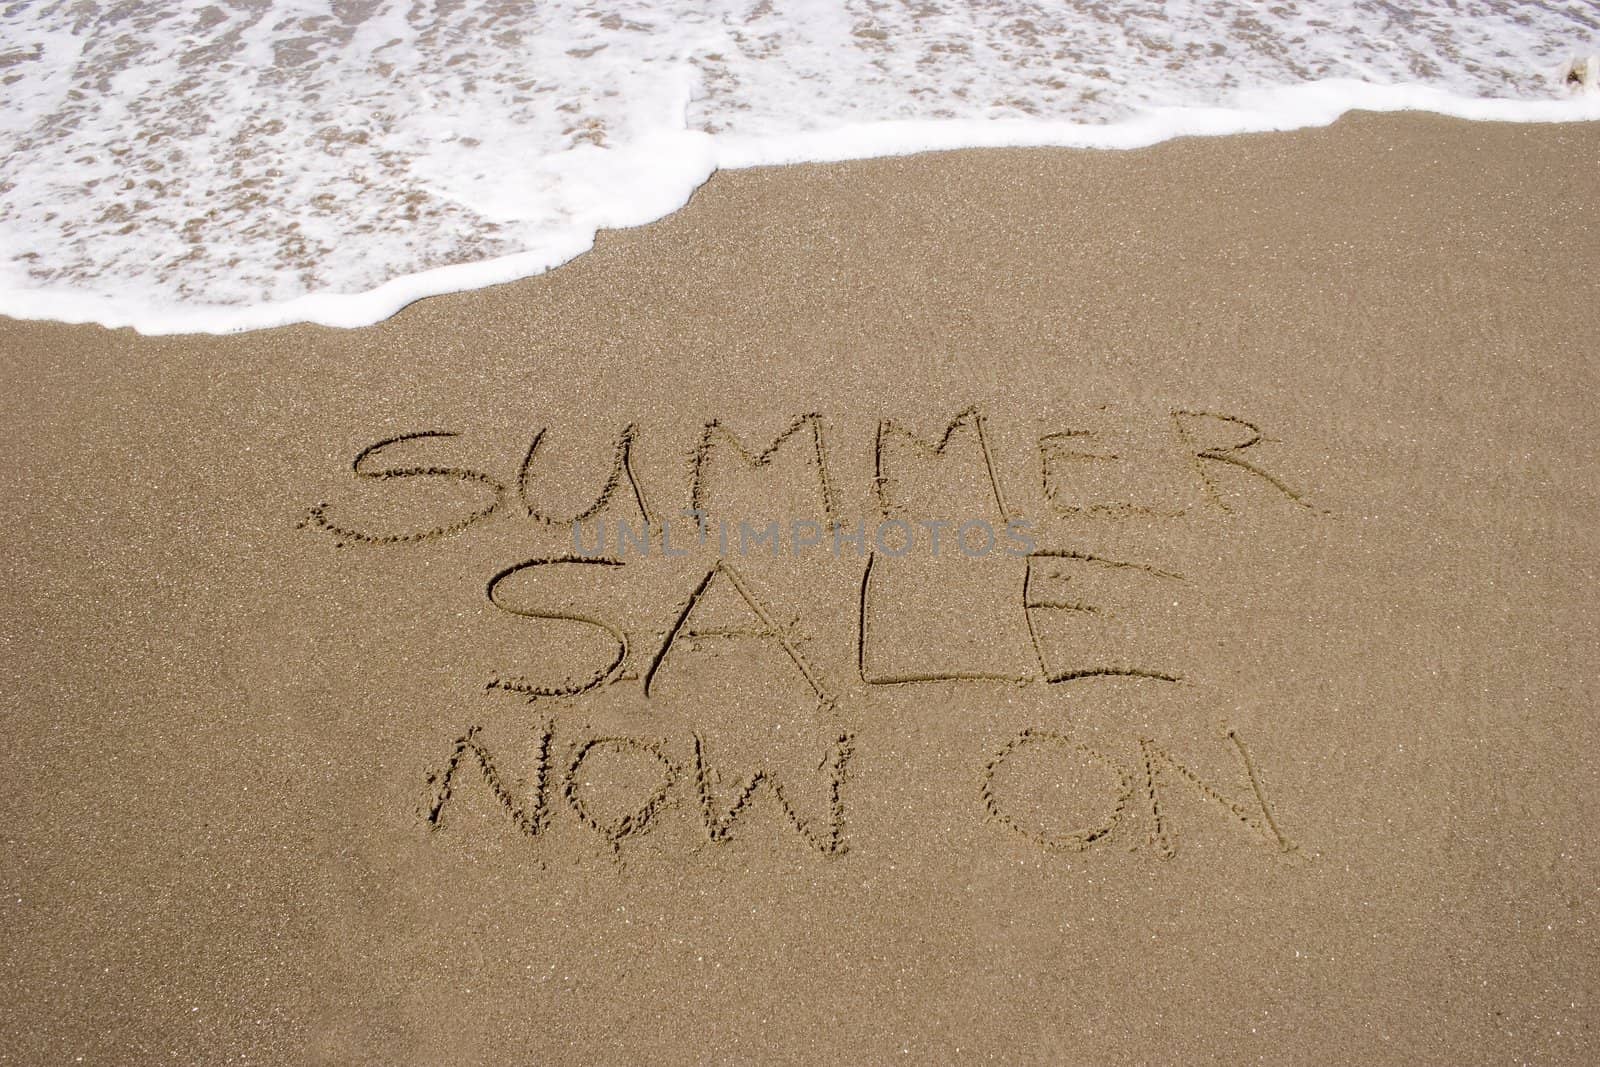 A summer sale written in the sand